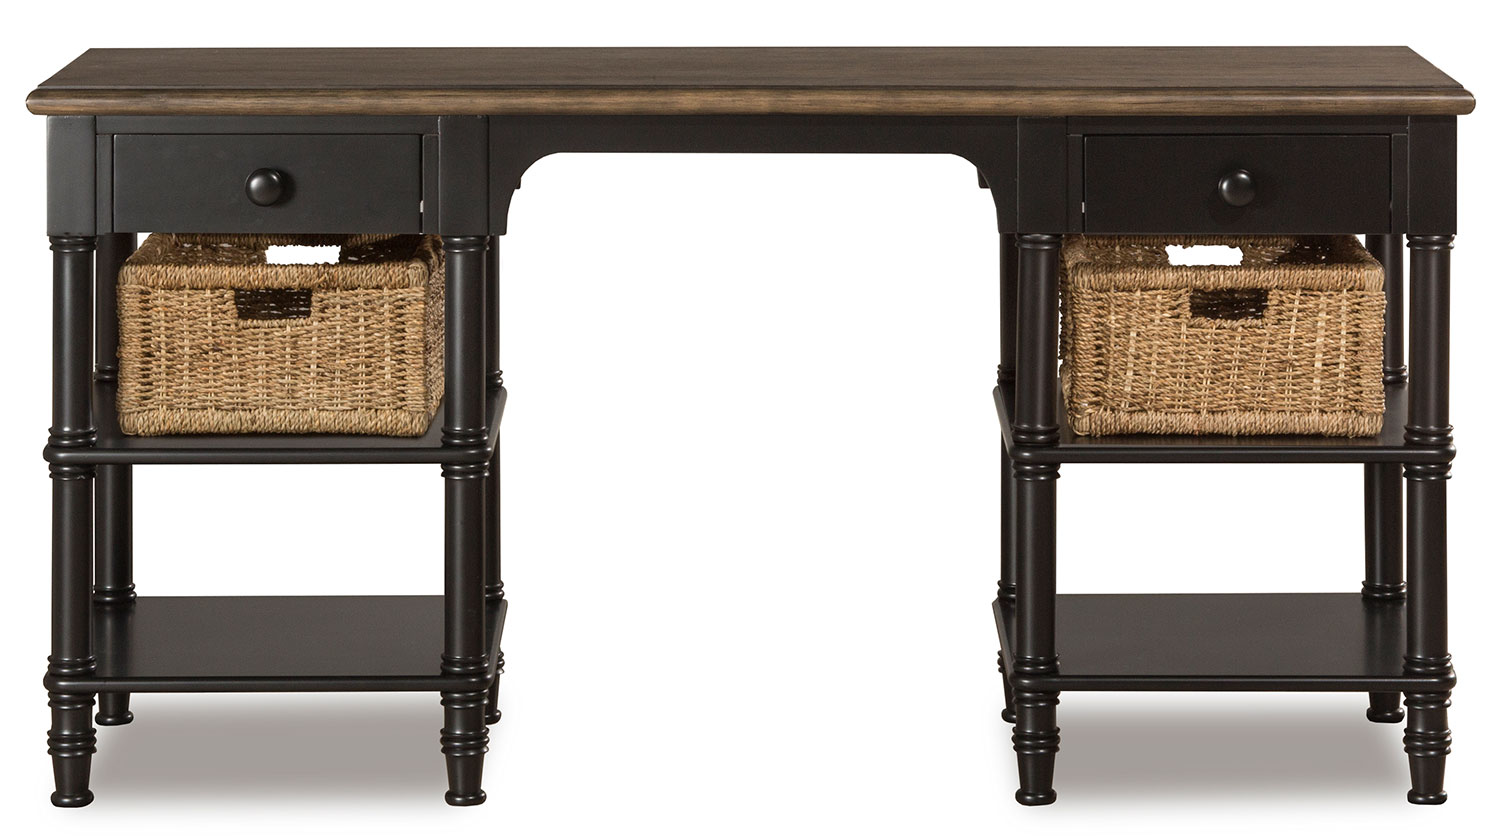 Hillsdale Seneca Desk with 2 Baskets - Waxed Black/Natural Seagrass